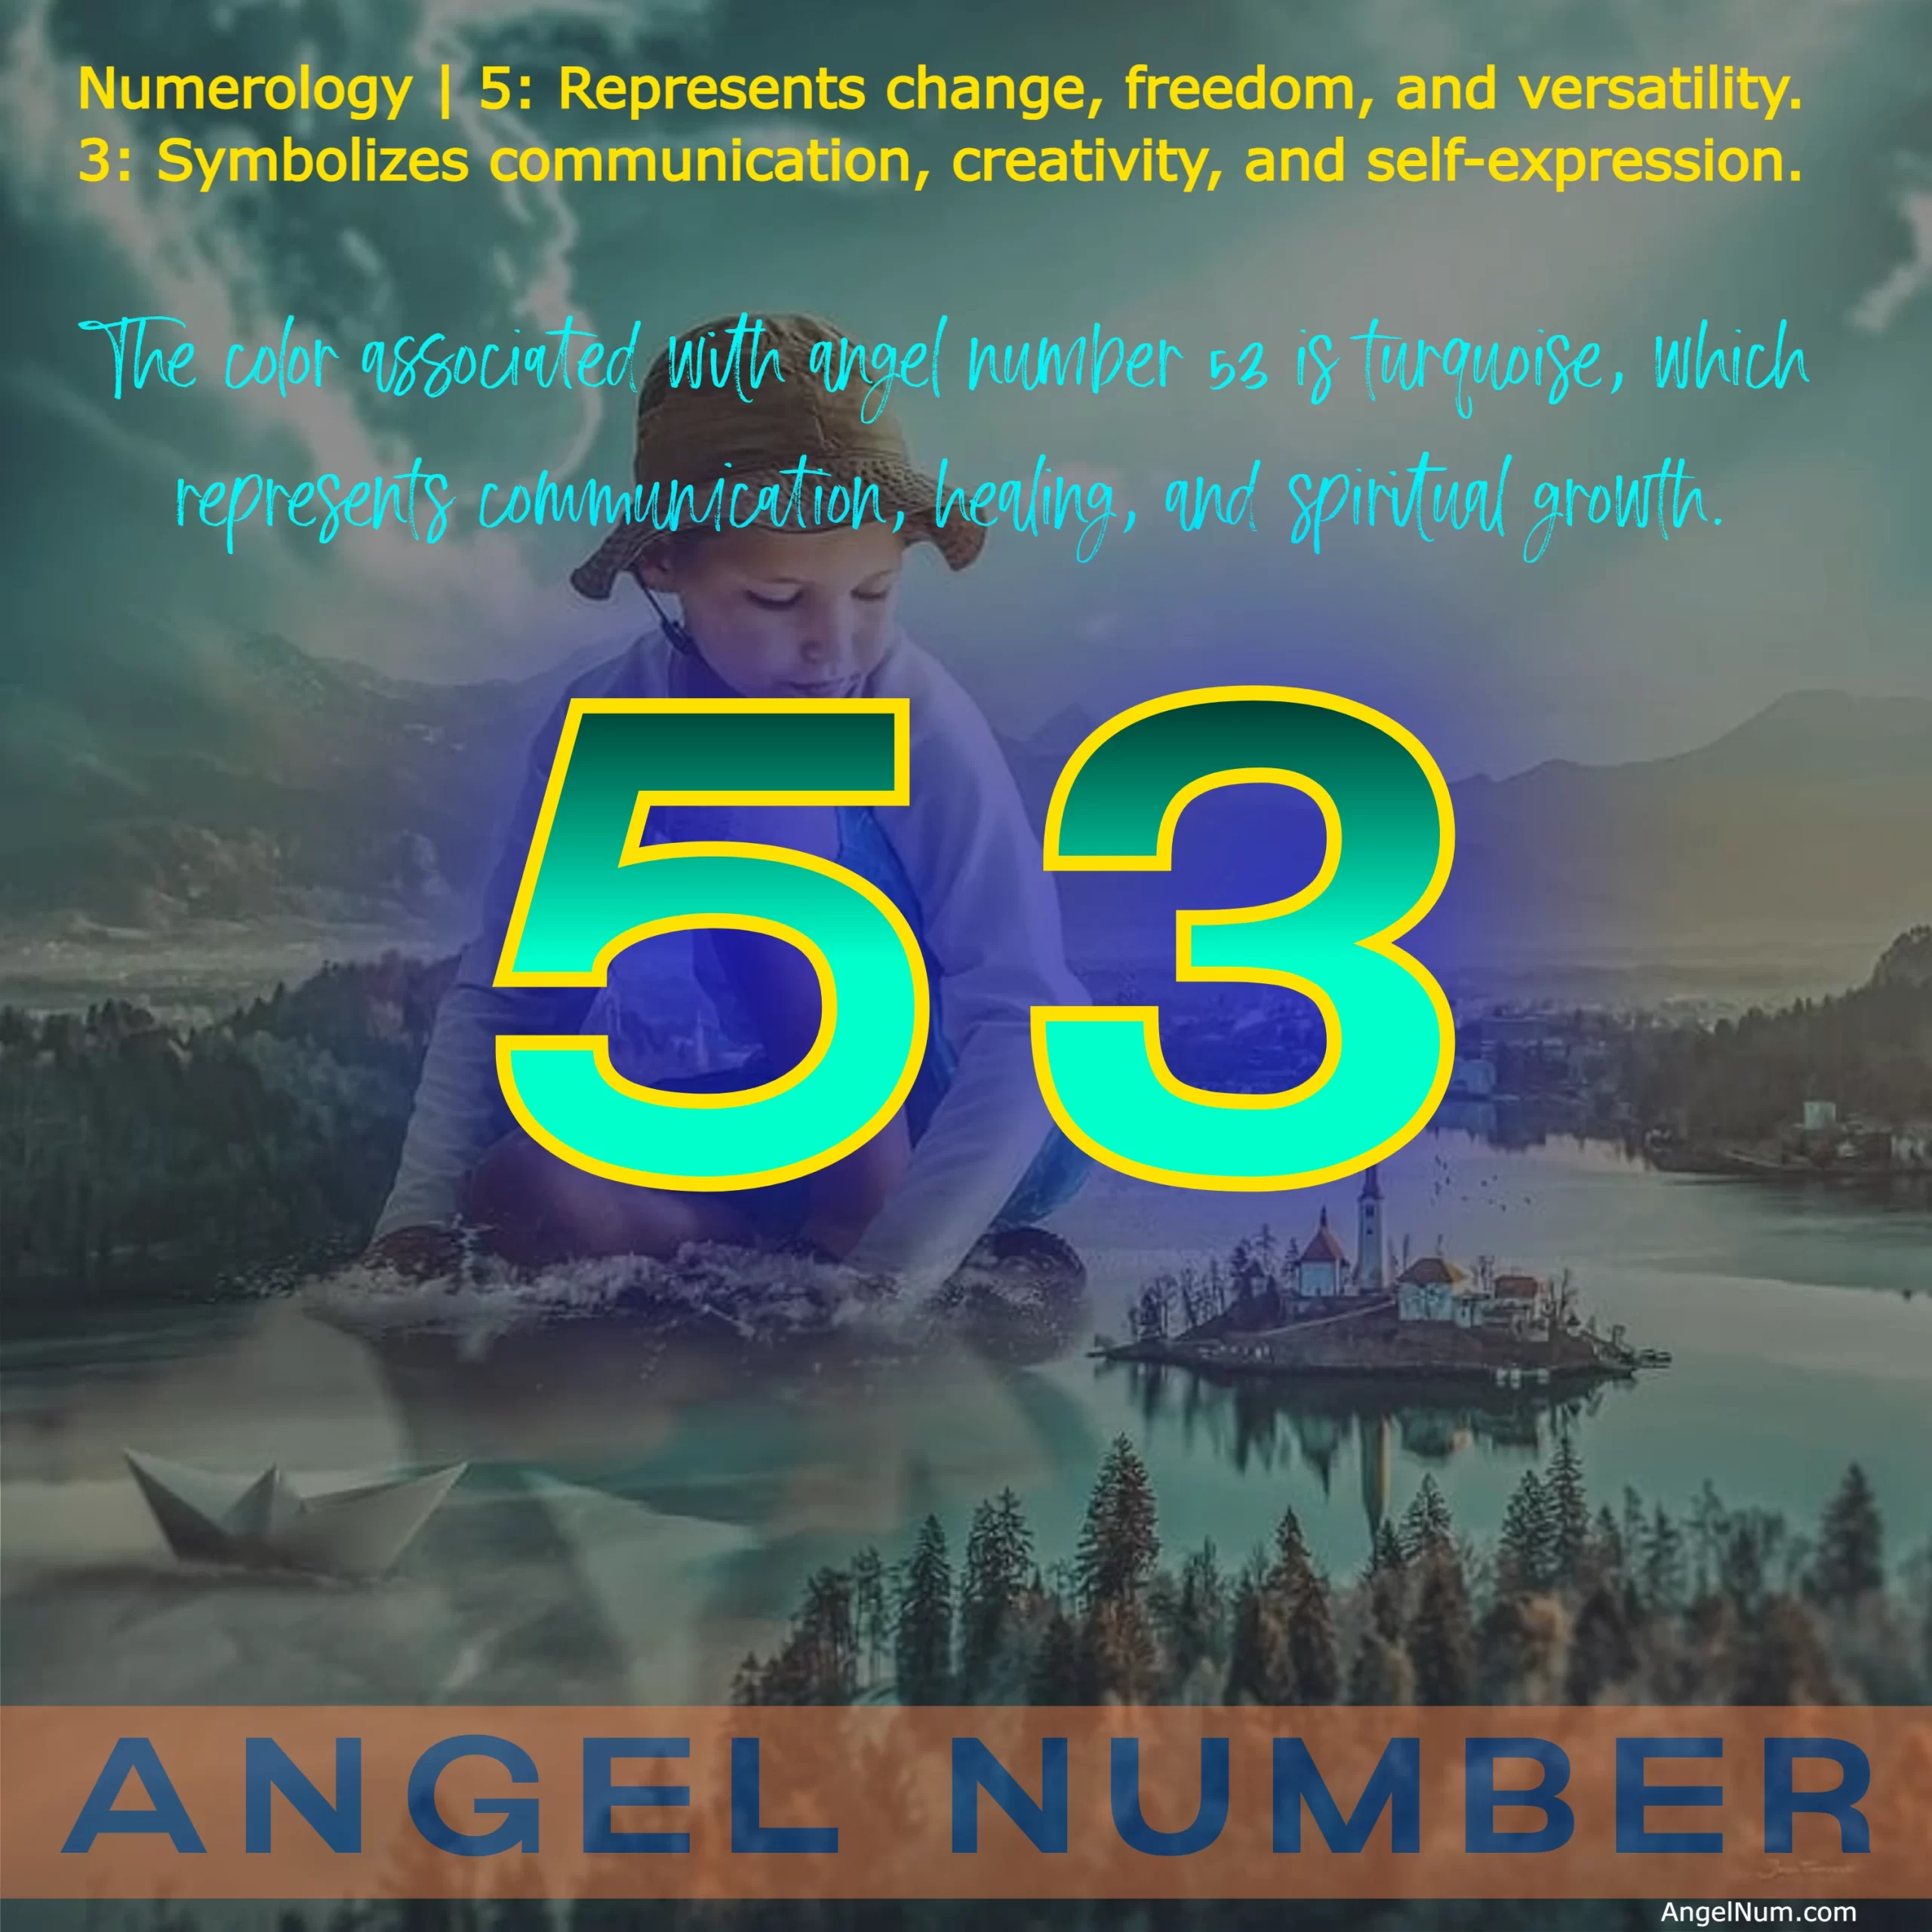 Unleashing Creativity and Positive Change: The Meaning of Angel Number 53